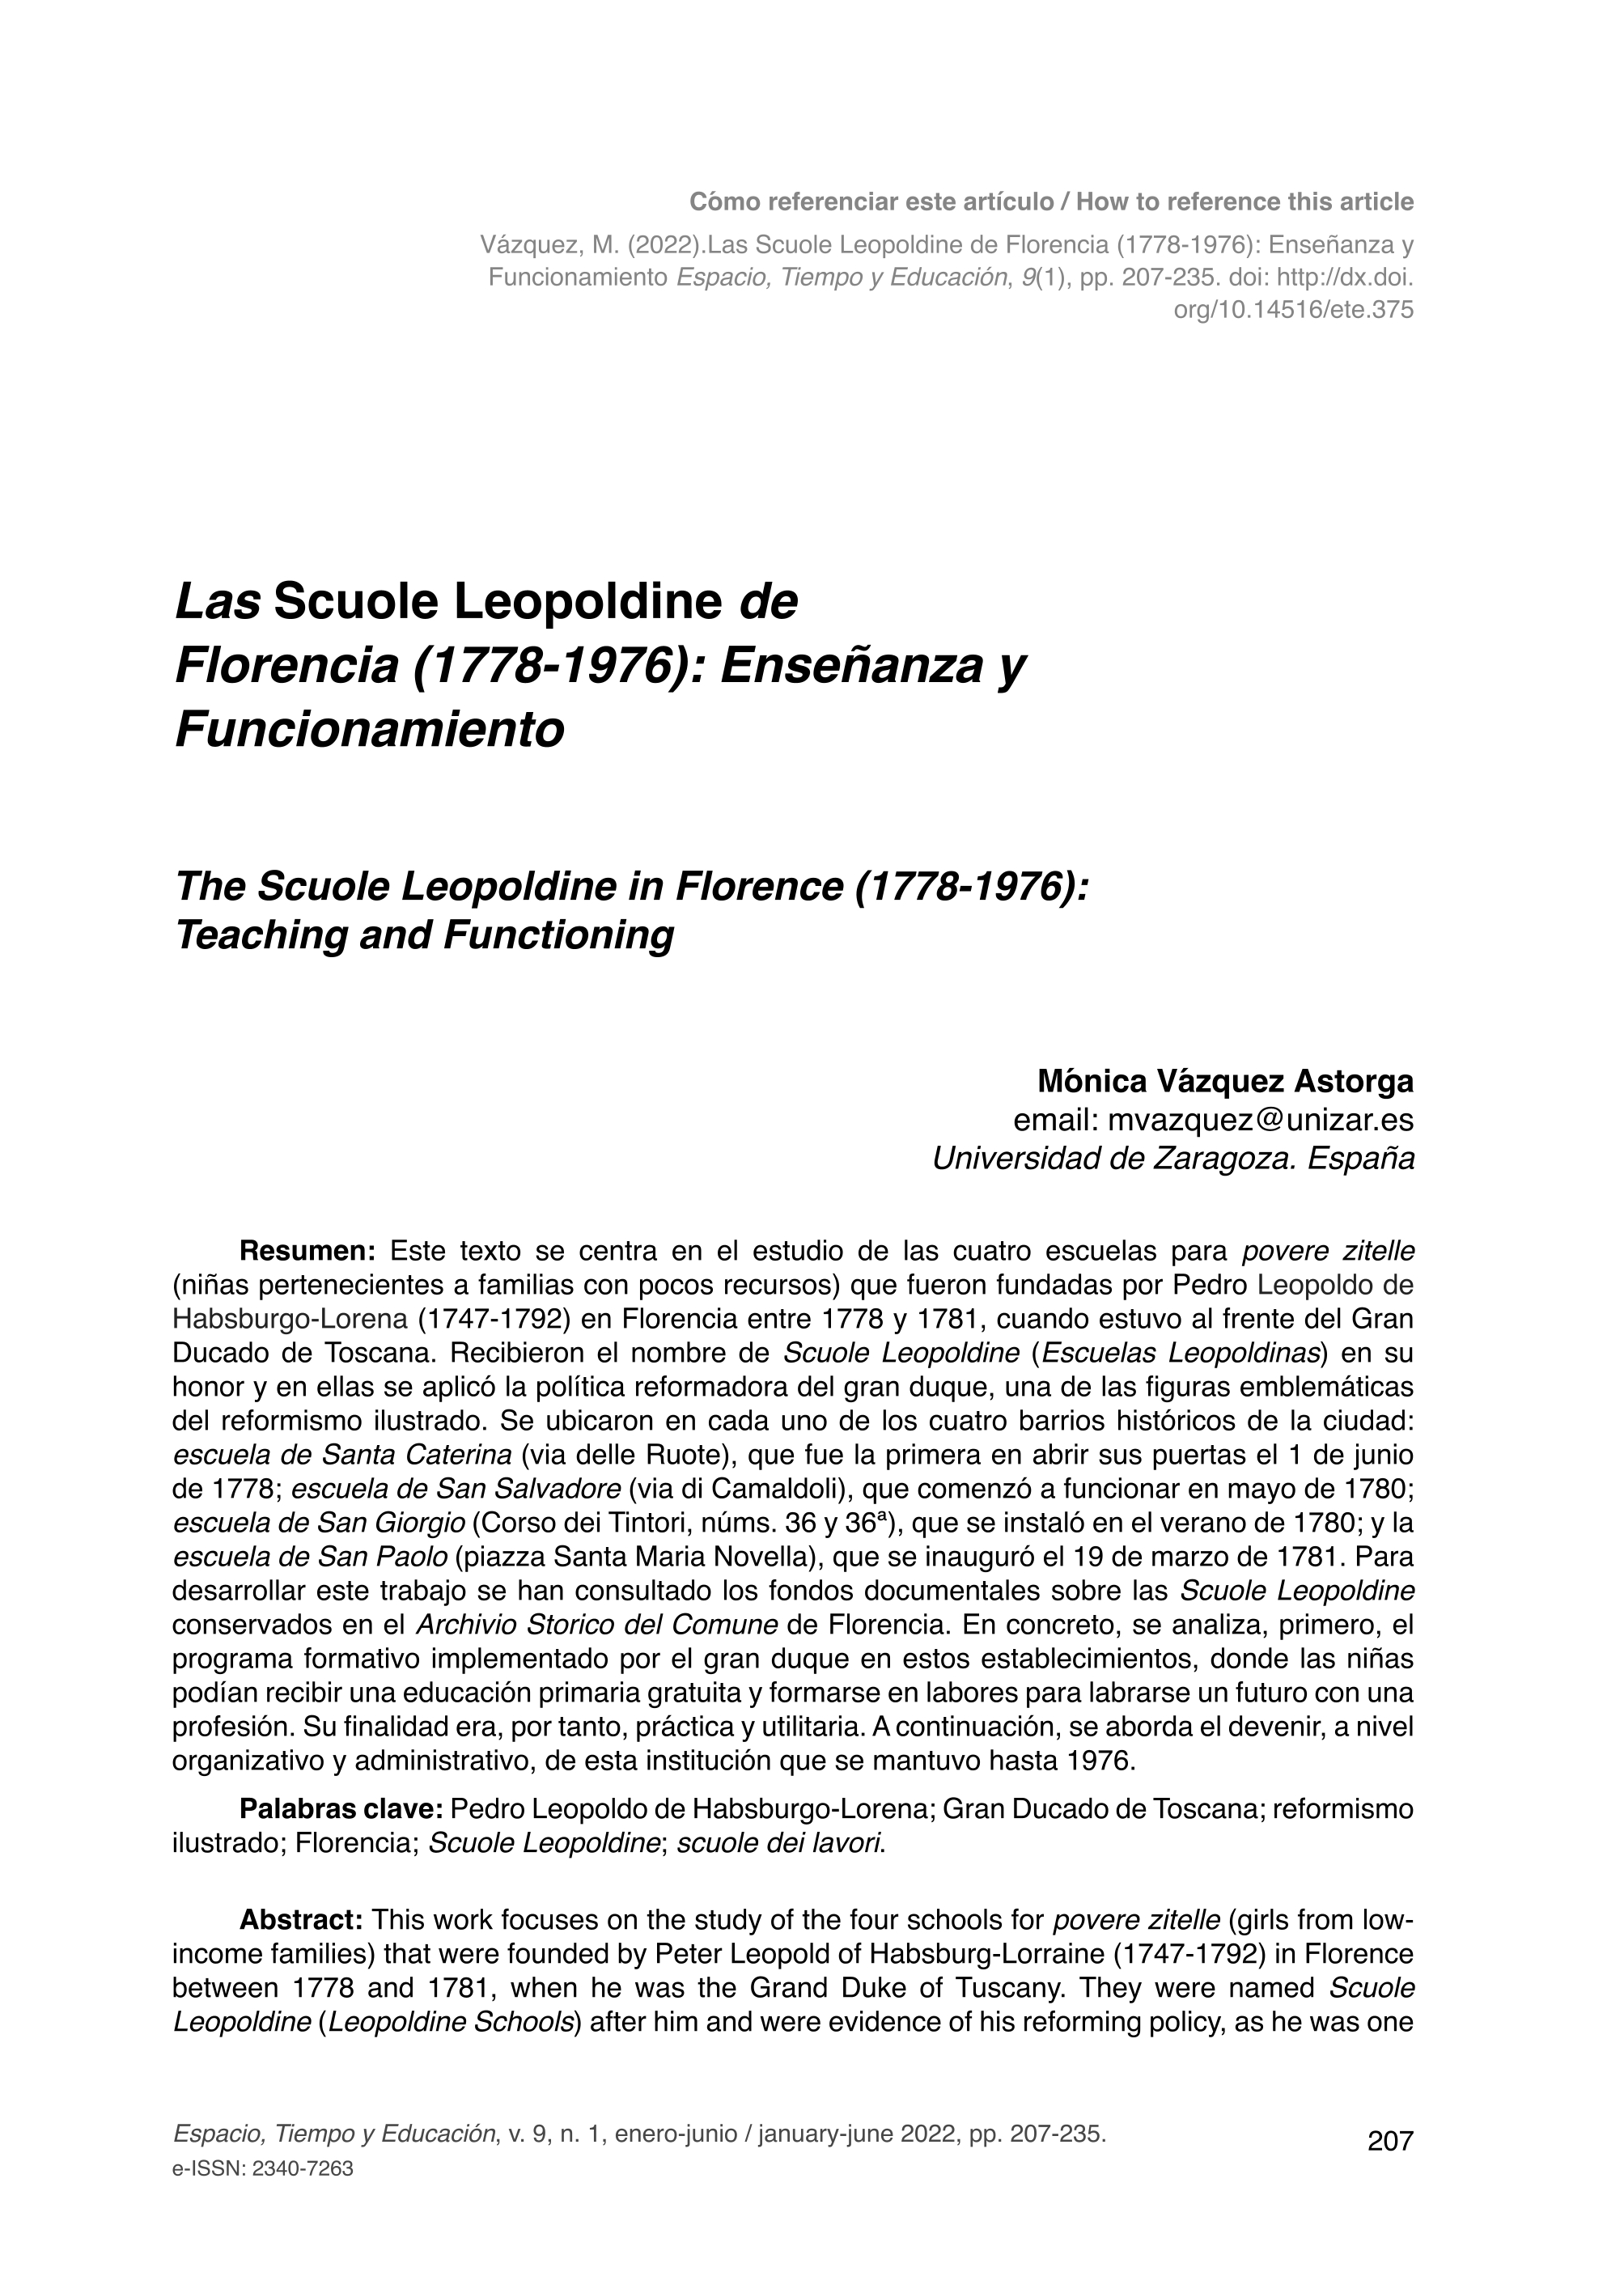 The scuole Leopoldine in Florence (1778-1976): teaching and functioning